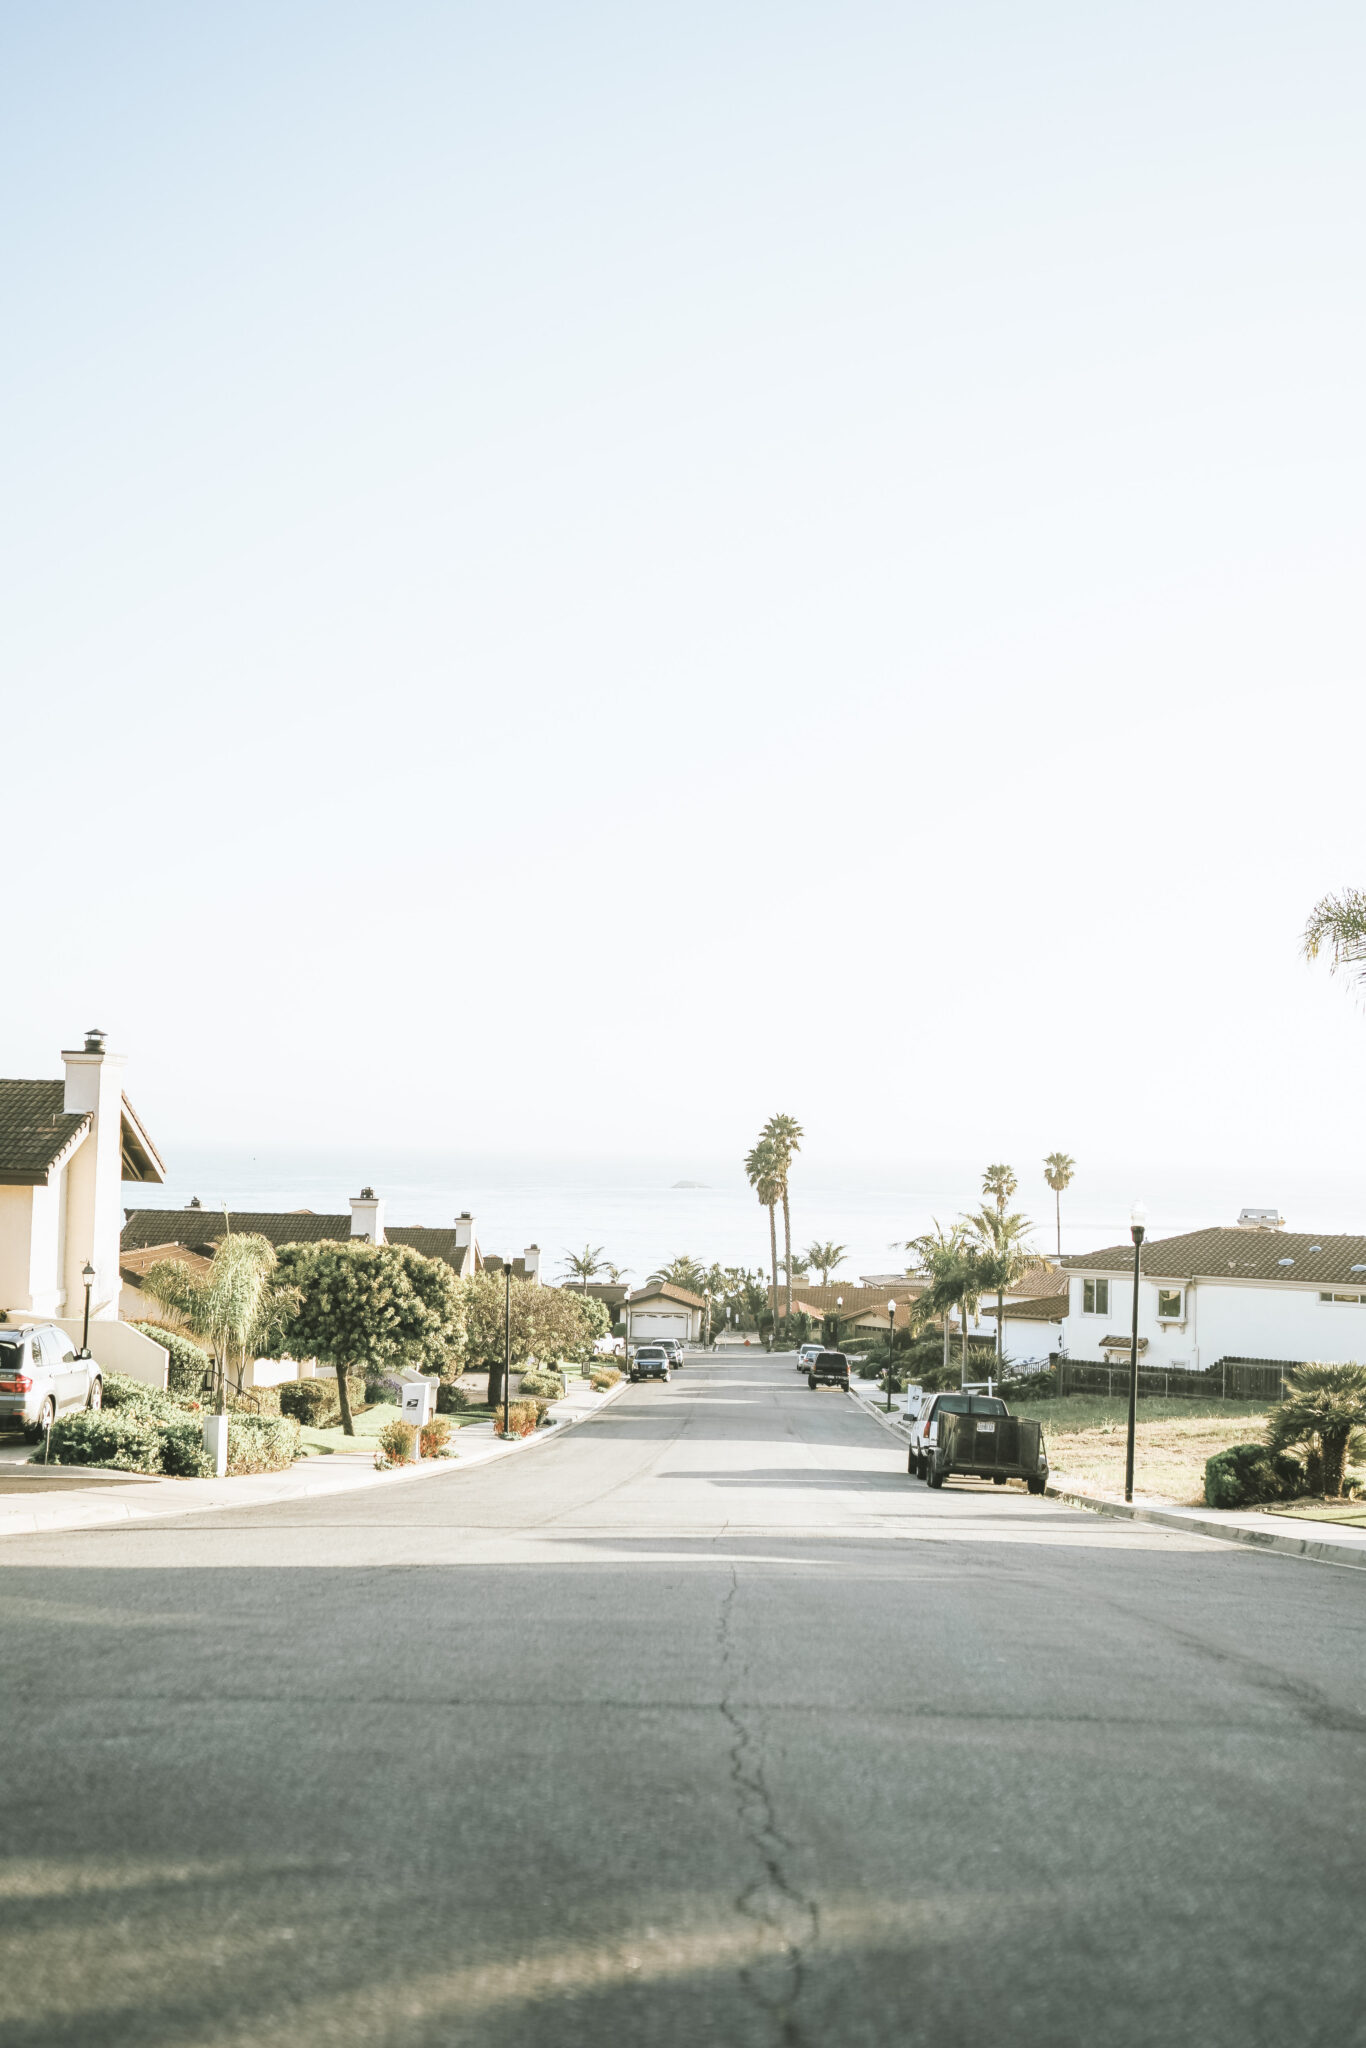 The suburbs are shown with palm trees lining the street. This article covers the question,is it time to move a suburb?